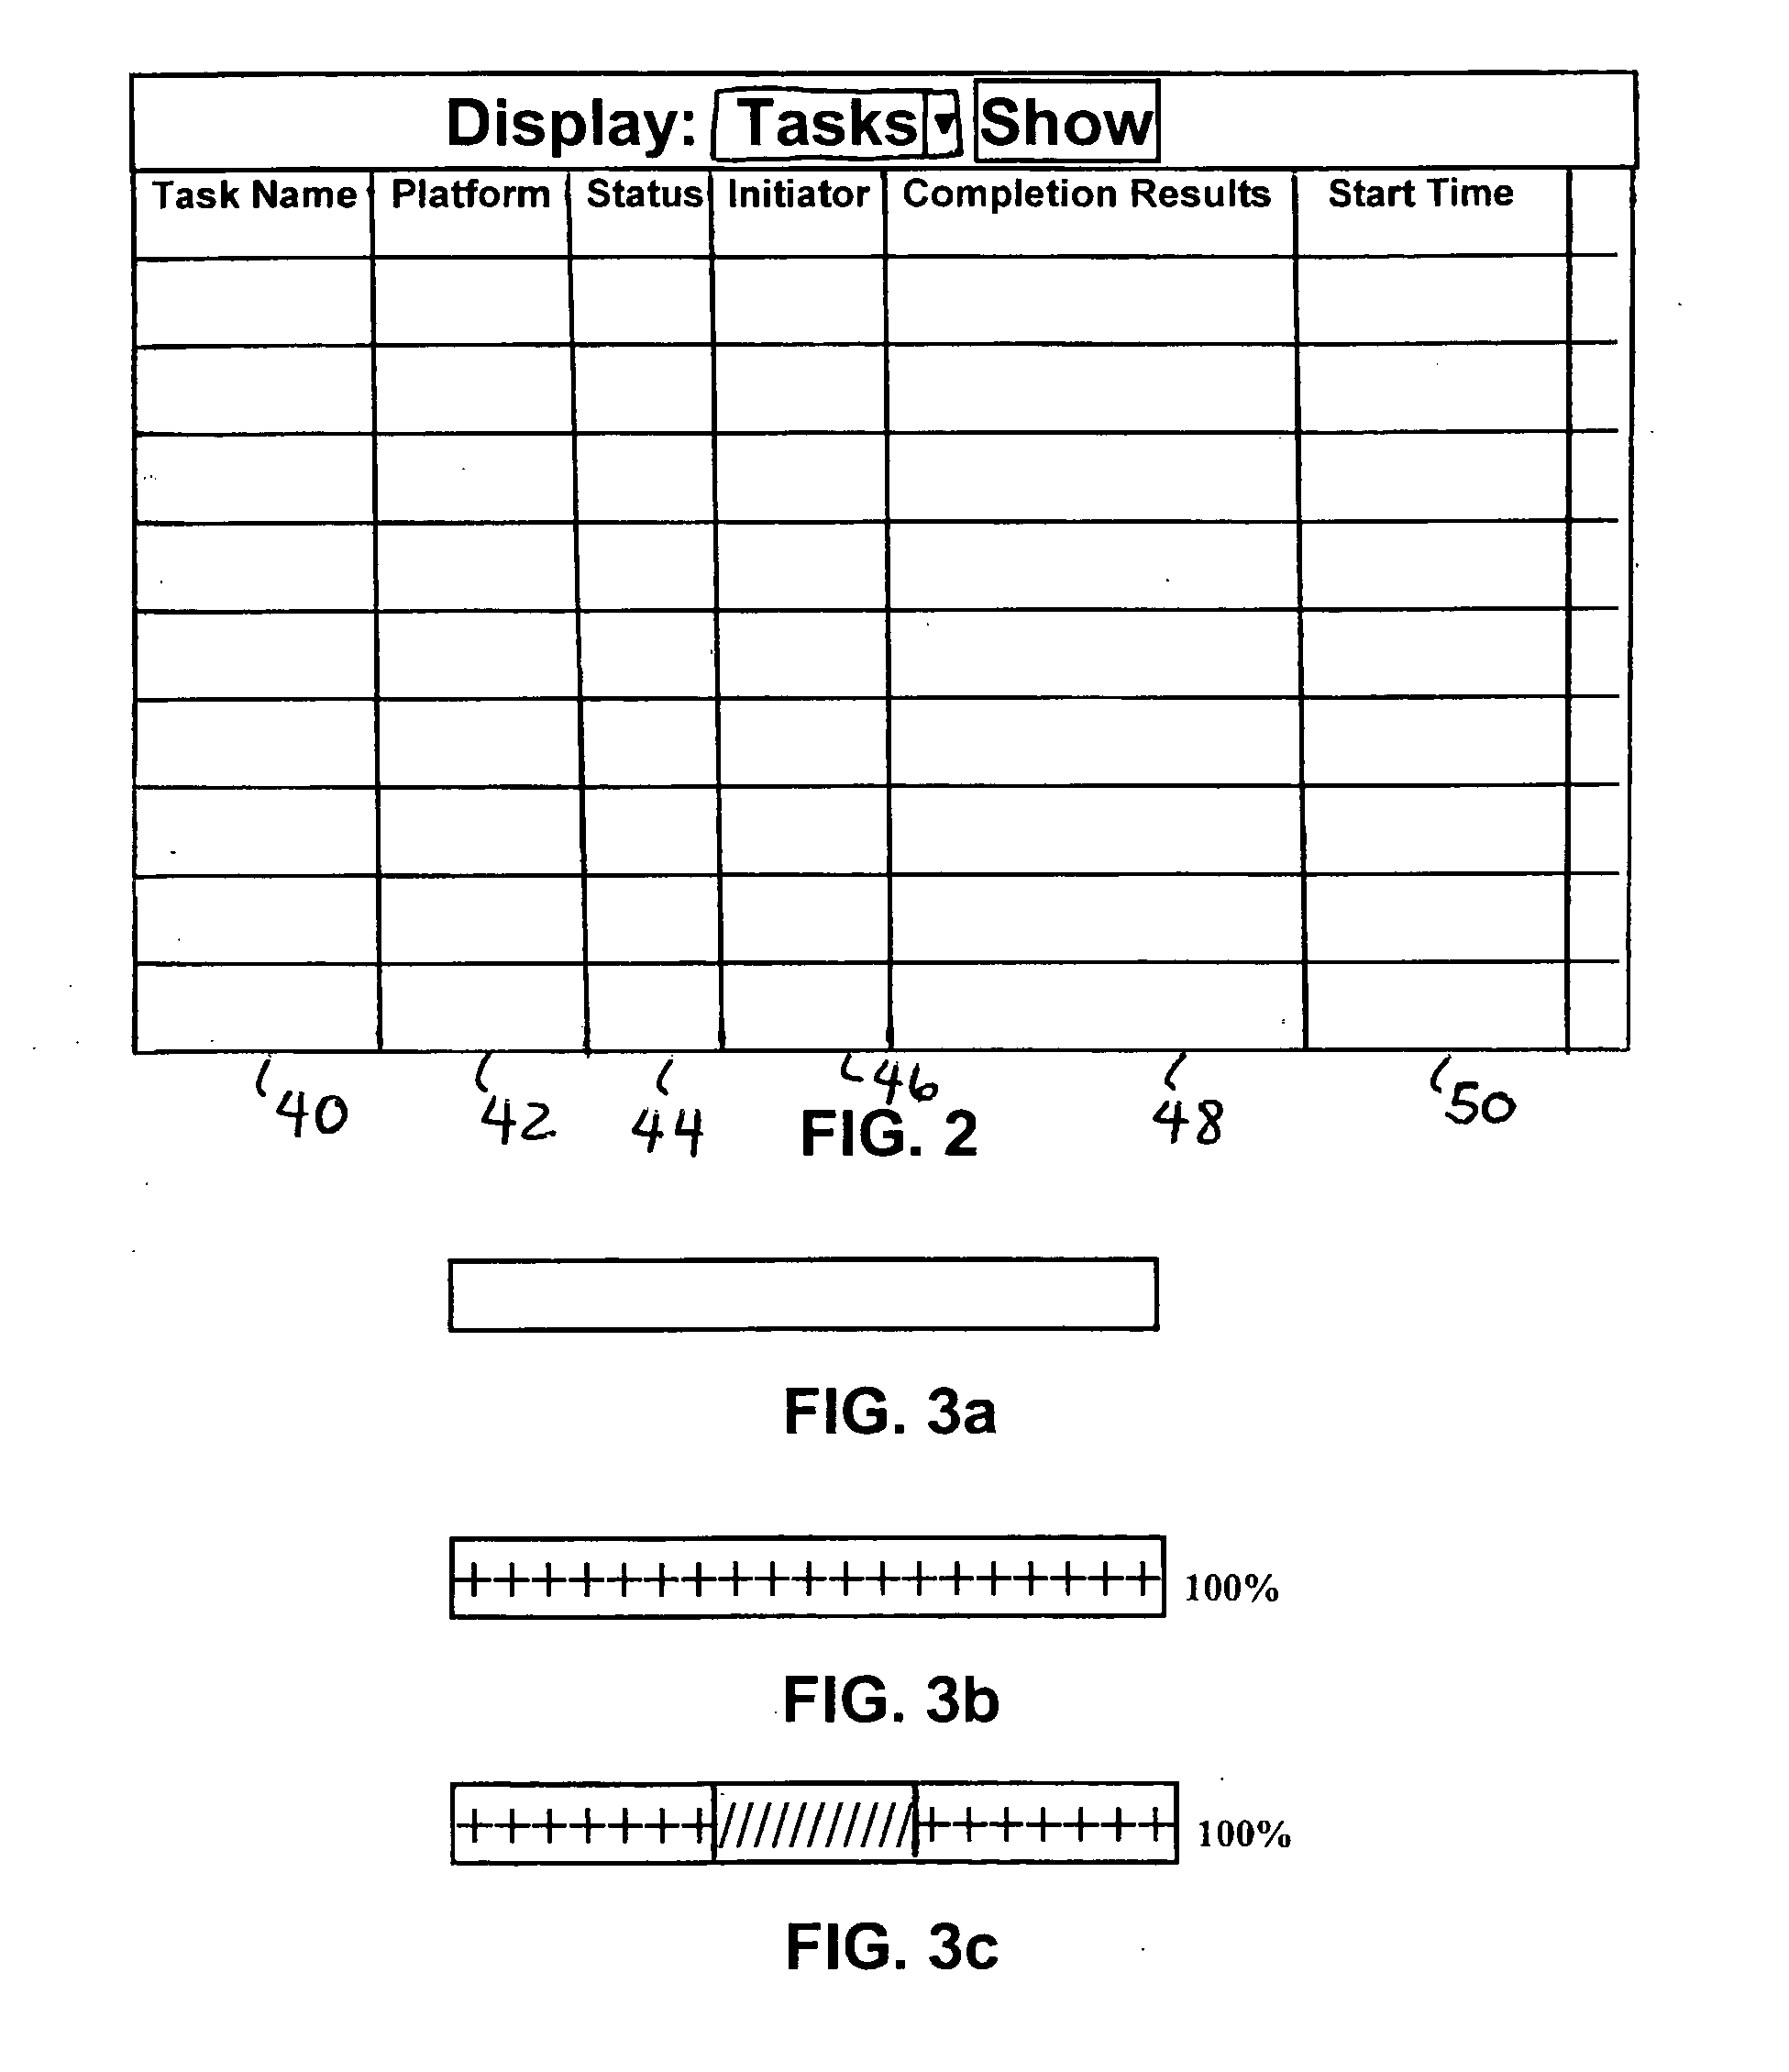 Method for indicating completion status of user initiated and system created tasks